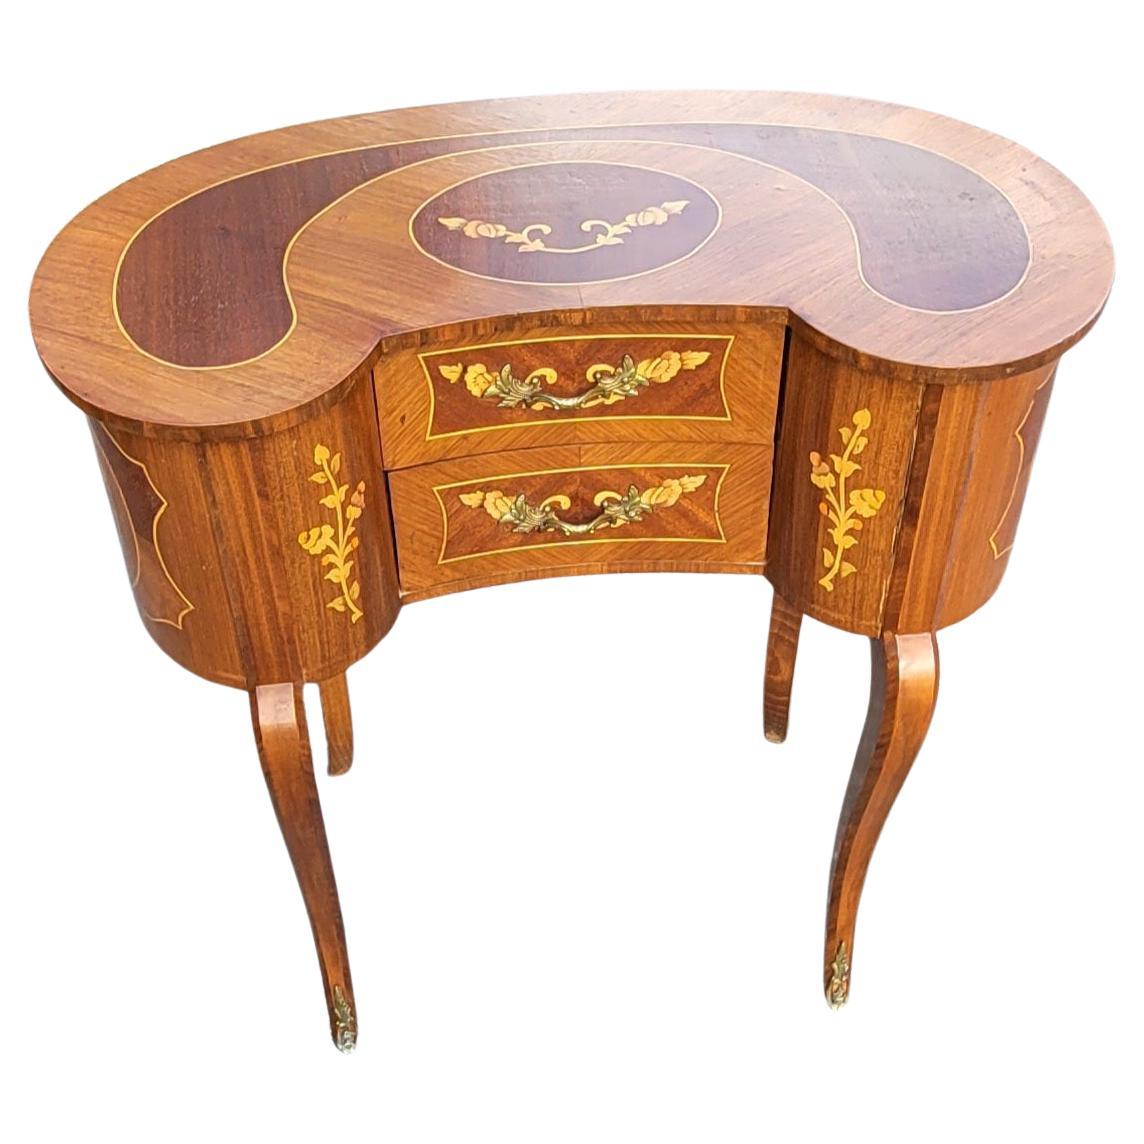 A gorgeous 1940s French Two-Drawer Continental Marquetry Mahogany kidney dressing table in great vintage condition. Features amazing symmetrical marquetry works, two drawers with original pulls and ormolu mounted front legs. Measures 26